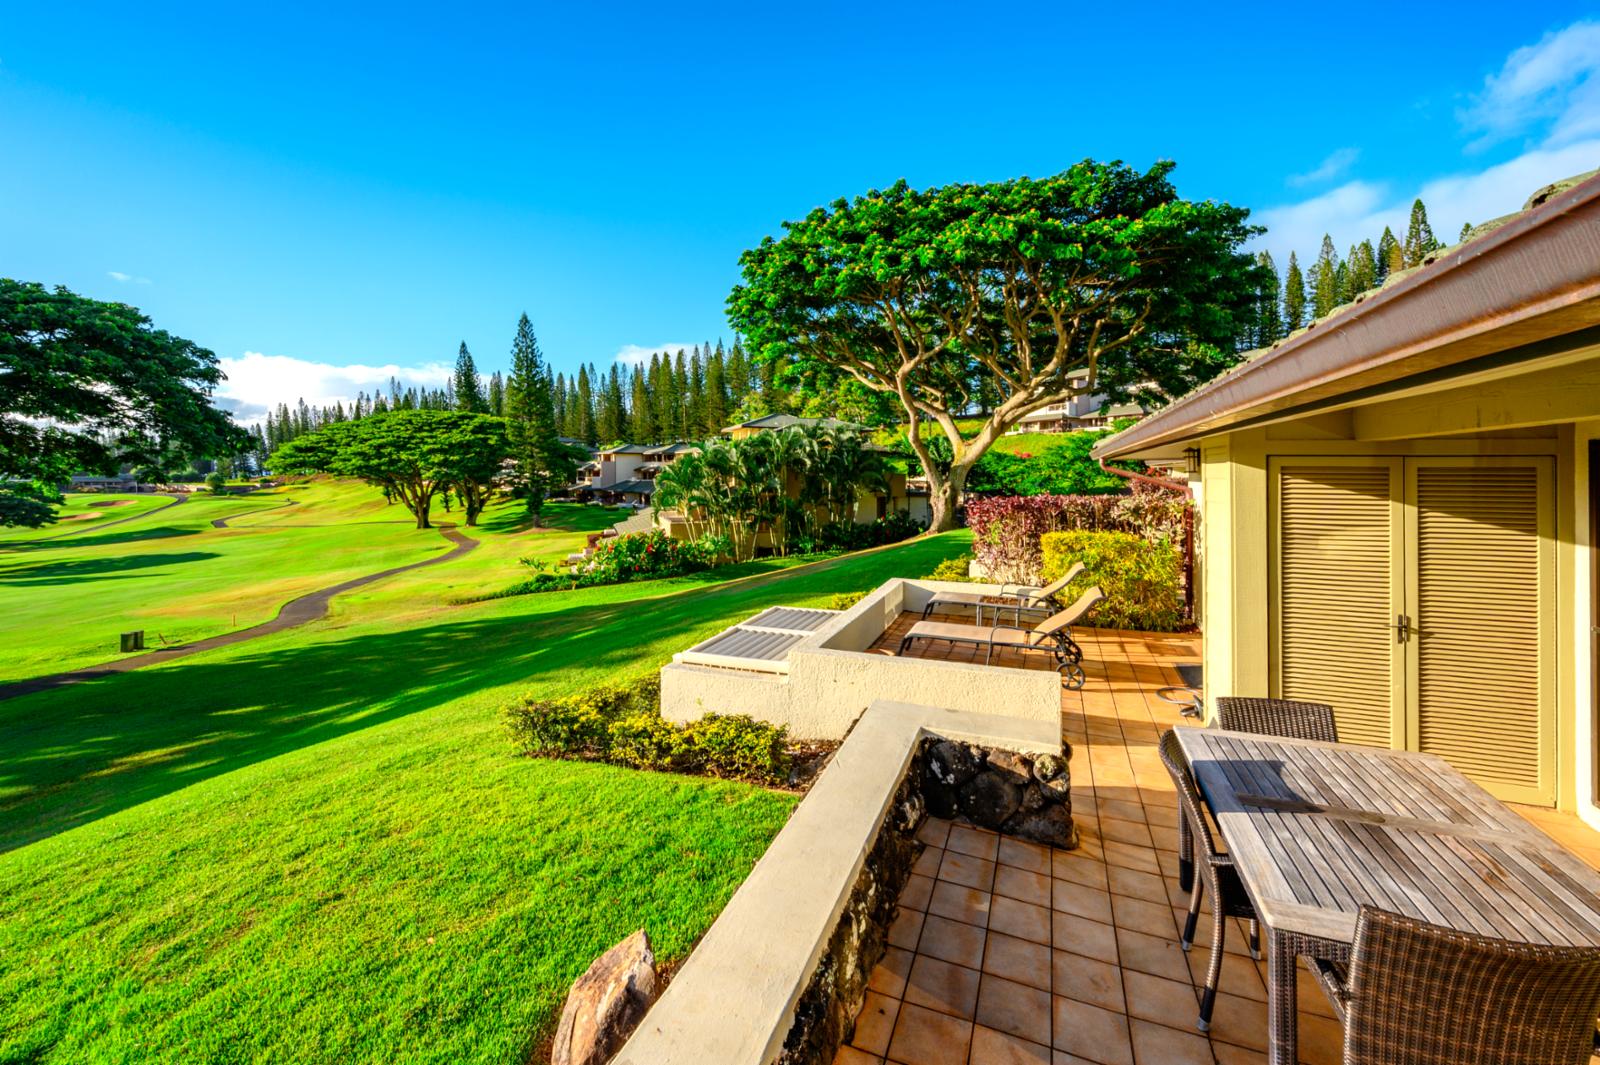 Outstanding Views from Lanai